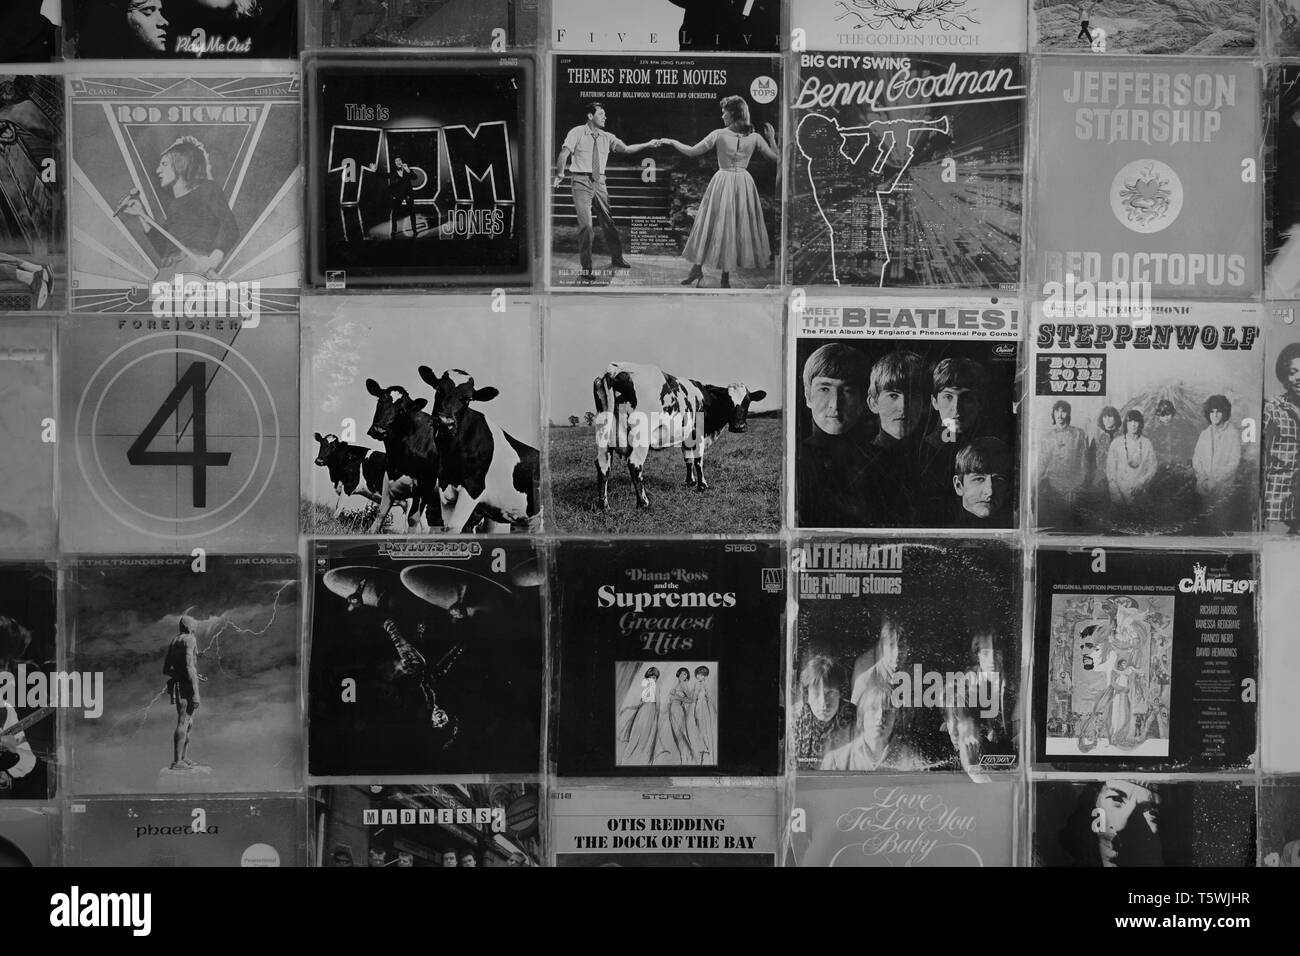 ATHENS, GREECE - AUGUST 29, 2018: Vintage pop rock music vinyl record album cover art displayed at record store. Black and white. Stock Photo